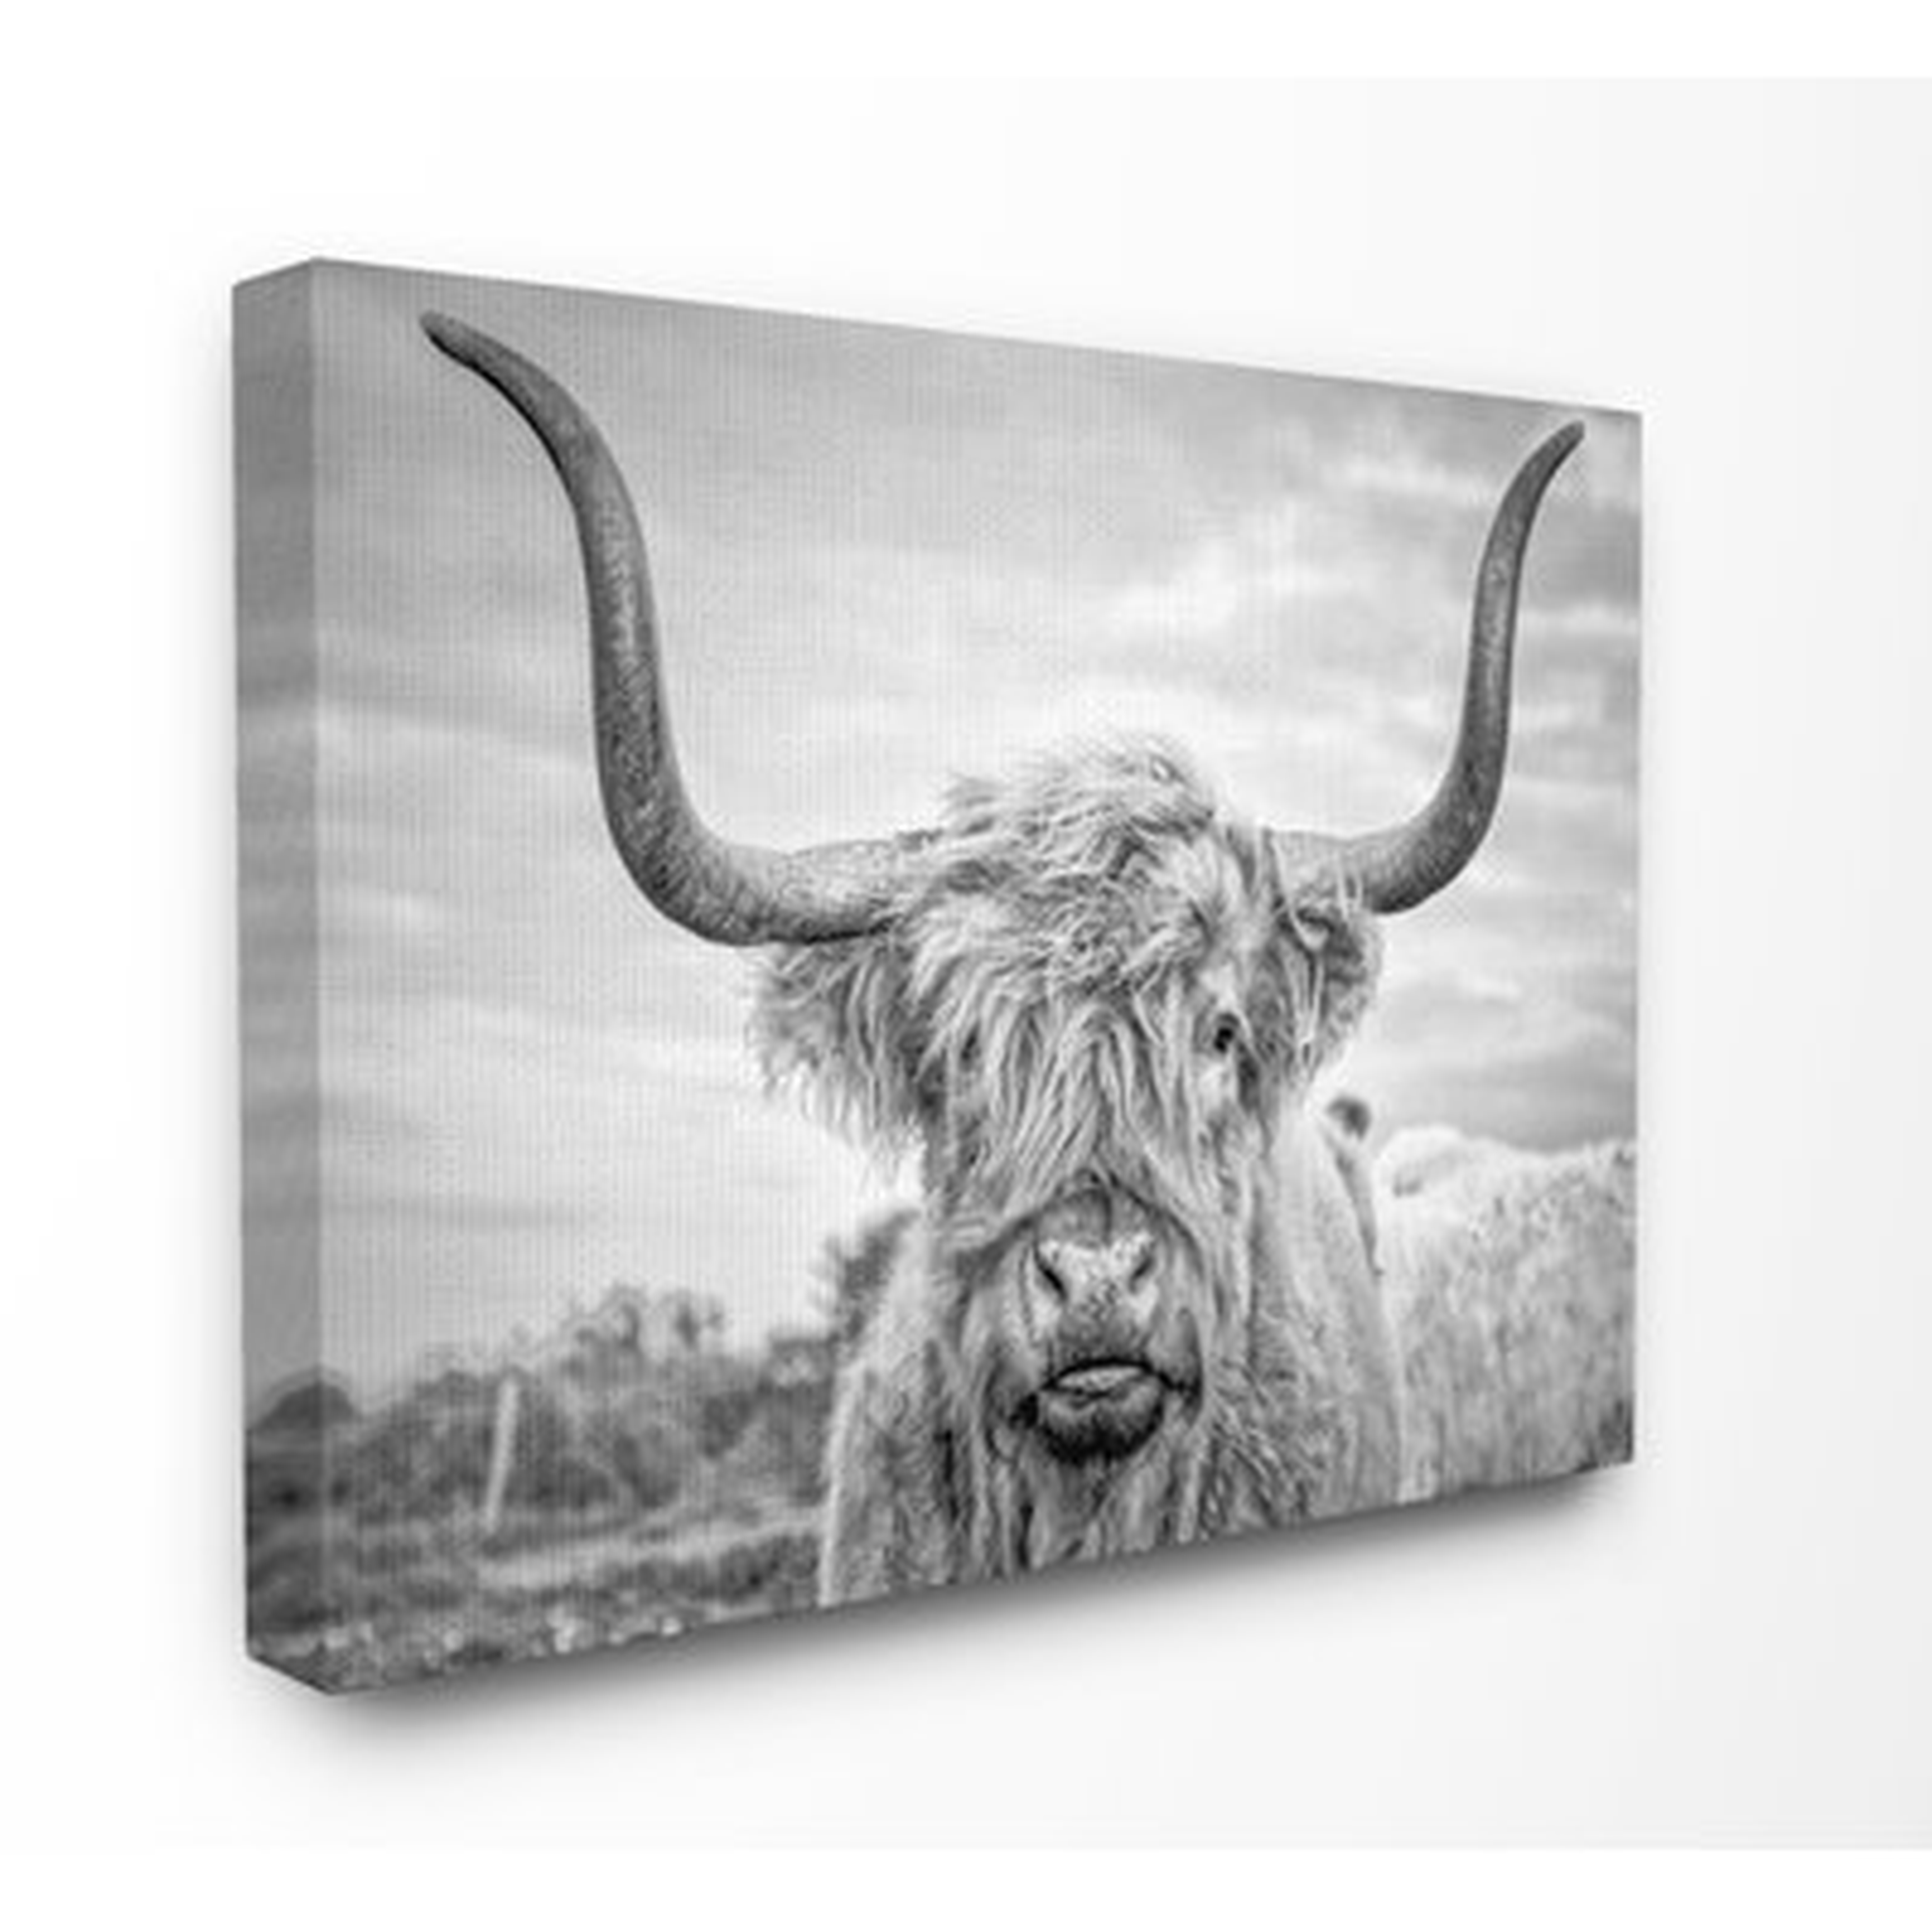 Highland Cow - Picture Frame Photograph Print on Canvas - AllModern